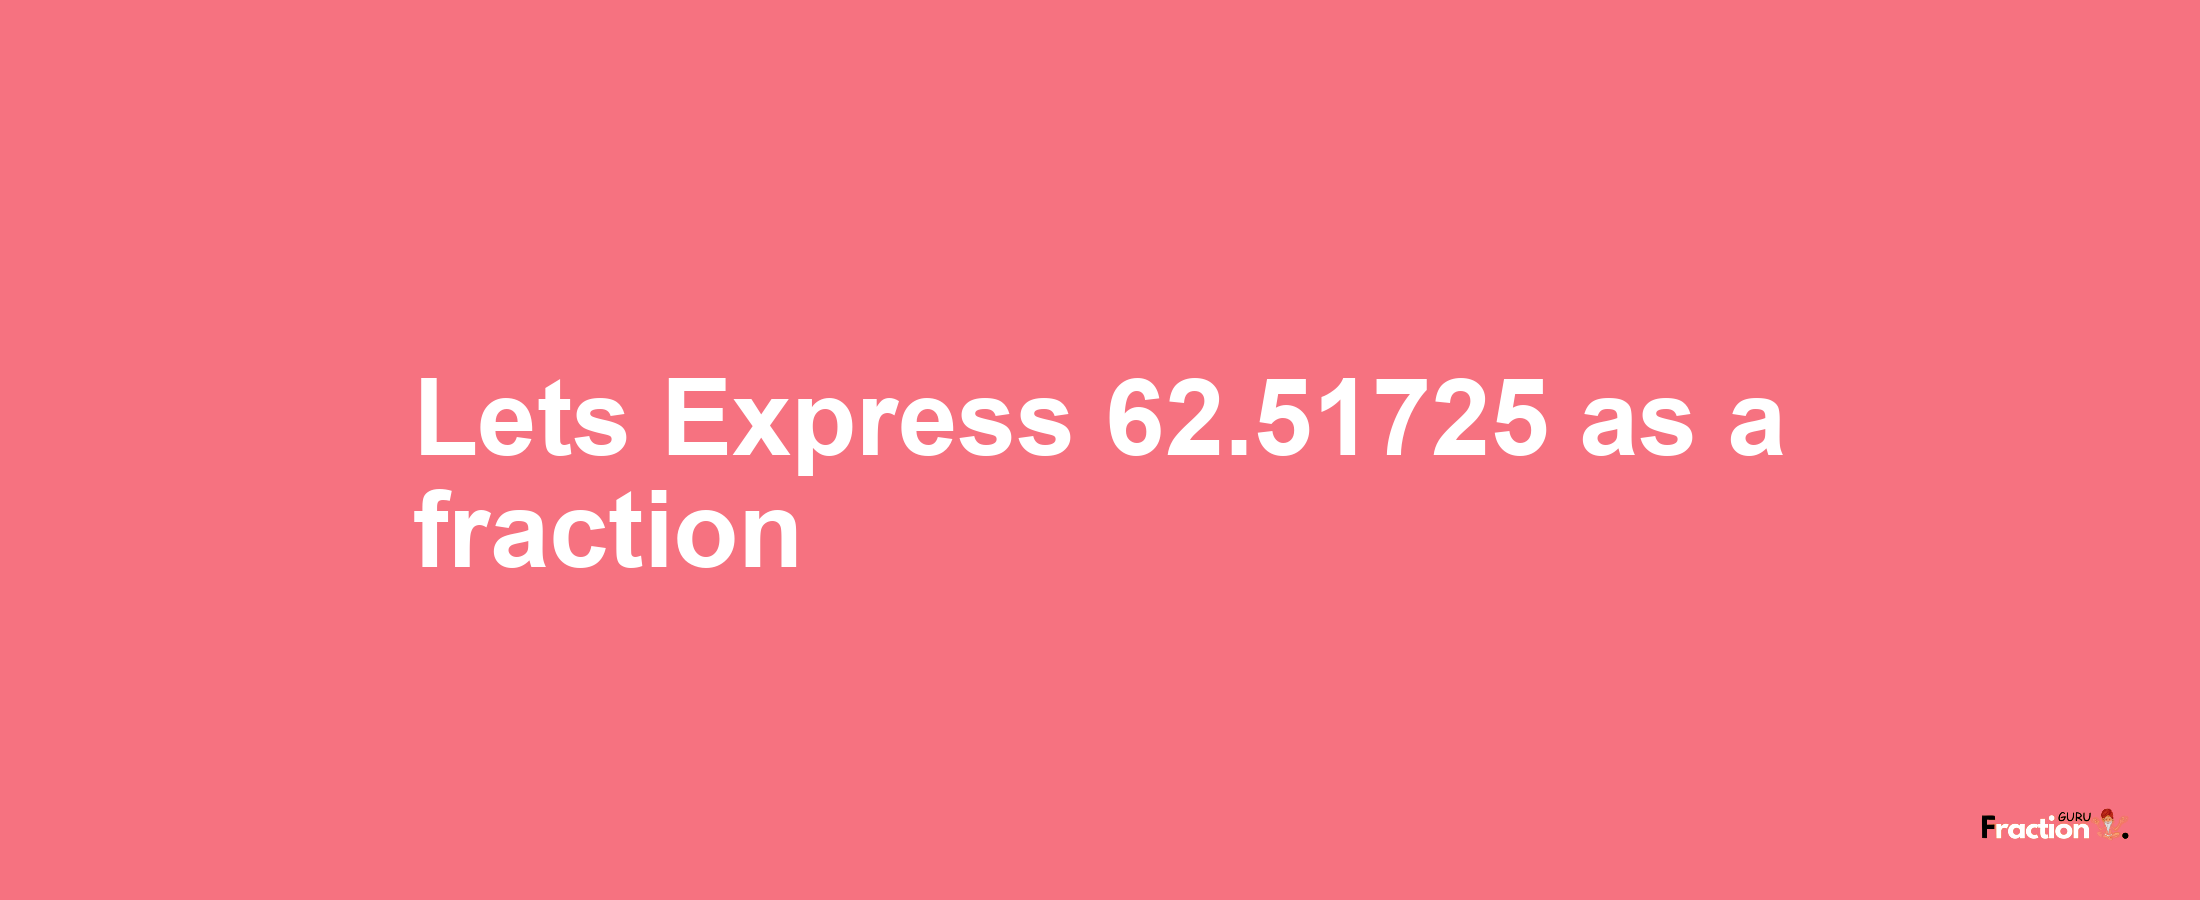 Lets Express 62.51725 as afraction